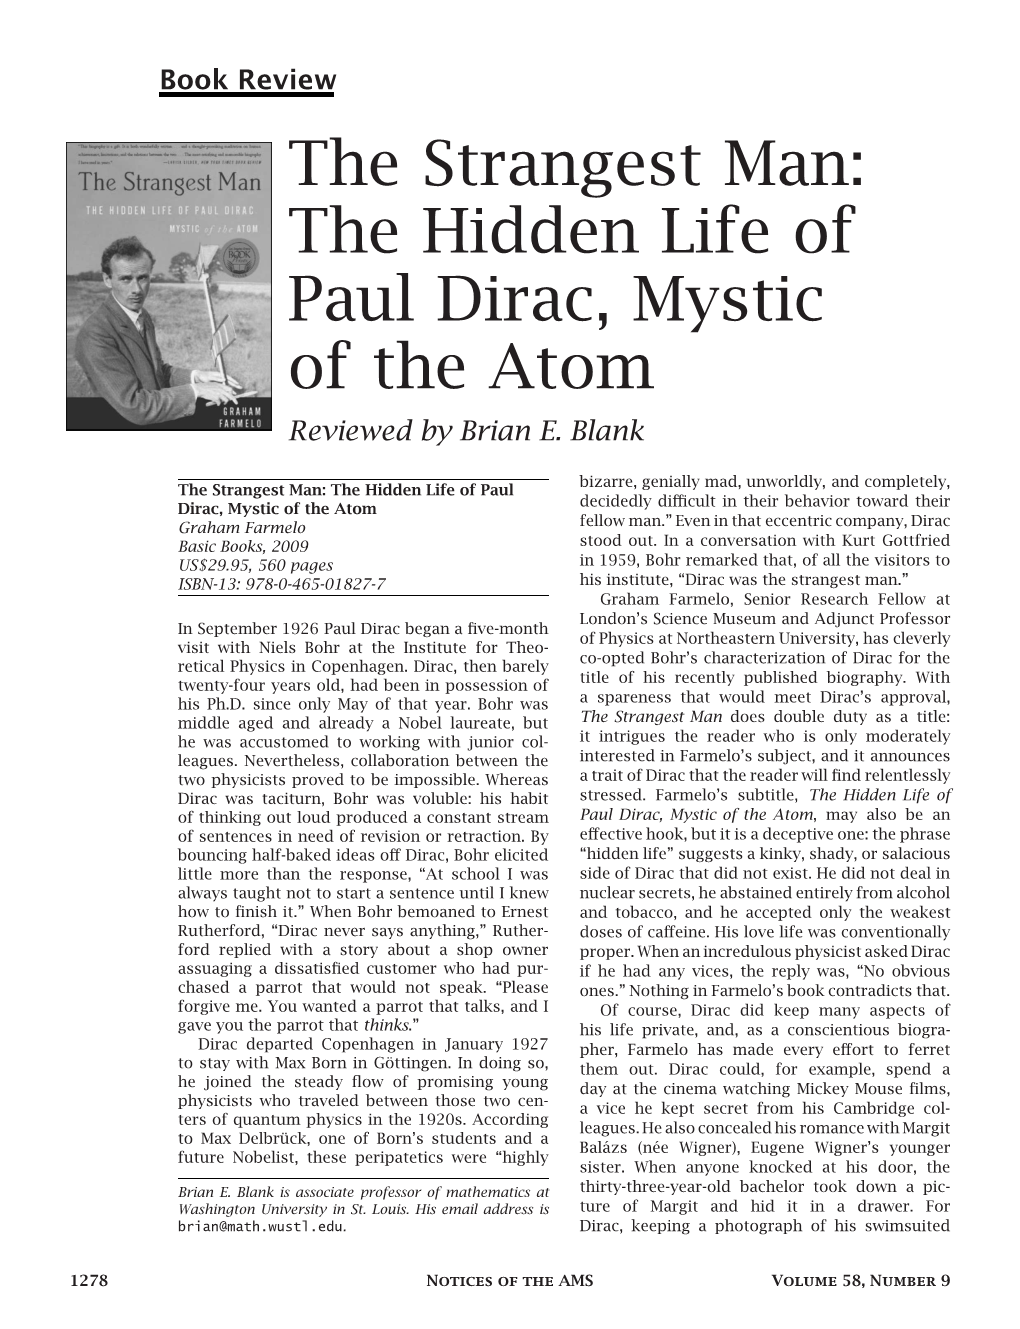 The Strangest Man: the Hidden Life of Paul Dirac, Mystic of the Atom Reviewed by Brian E